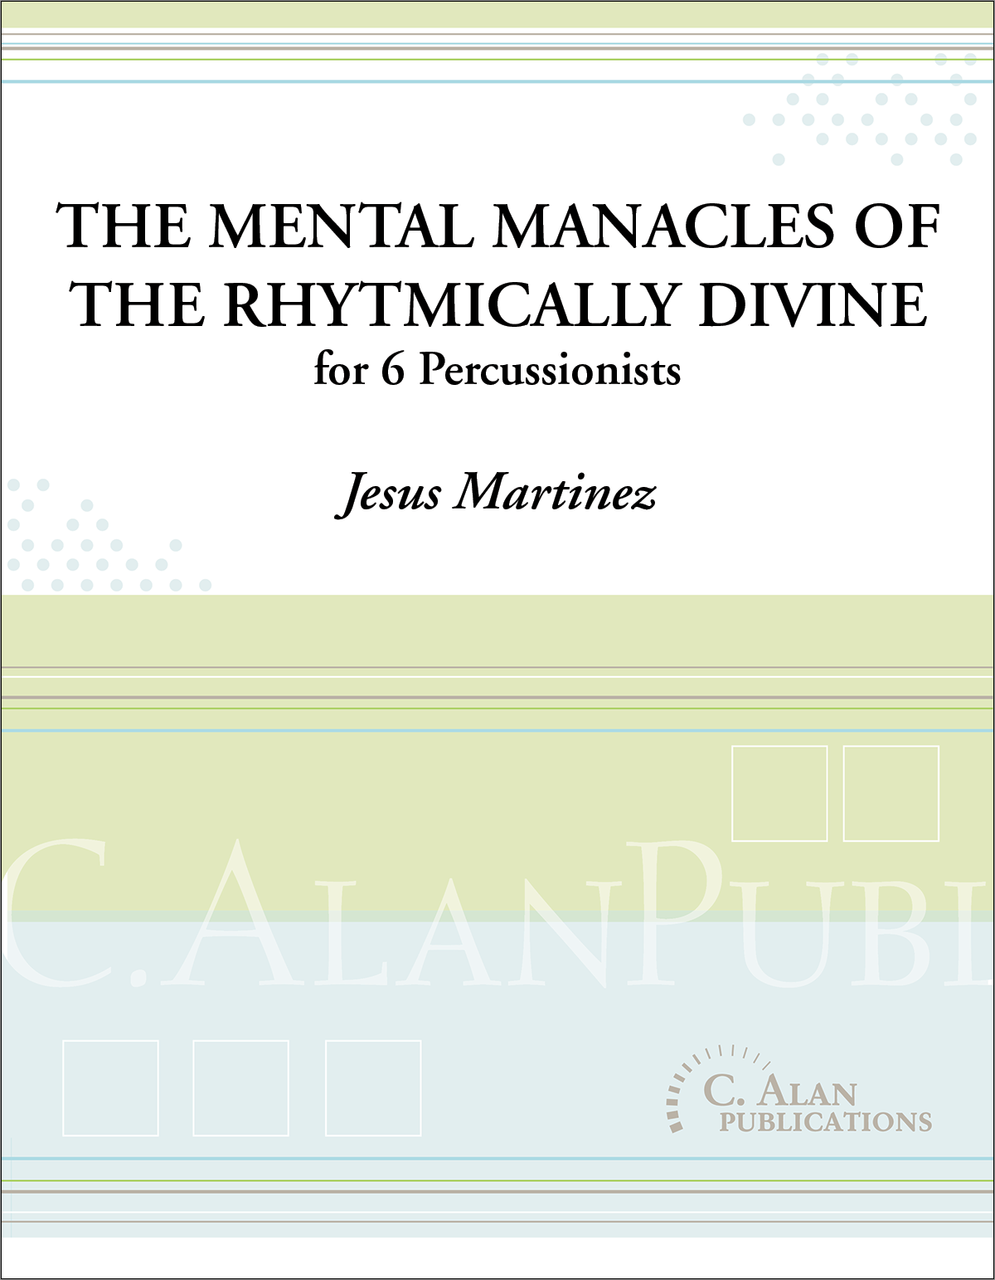 The Mental Manacles of the Rhythmically Divine by Jesus Martinez